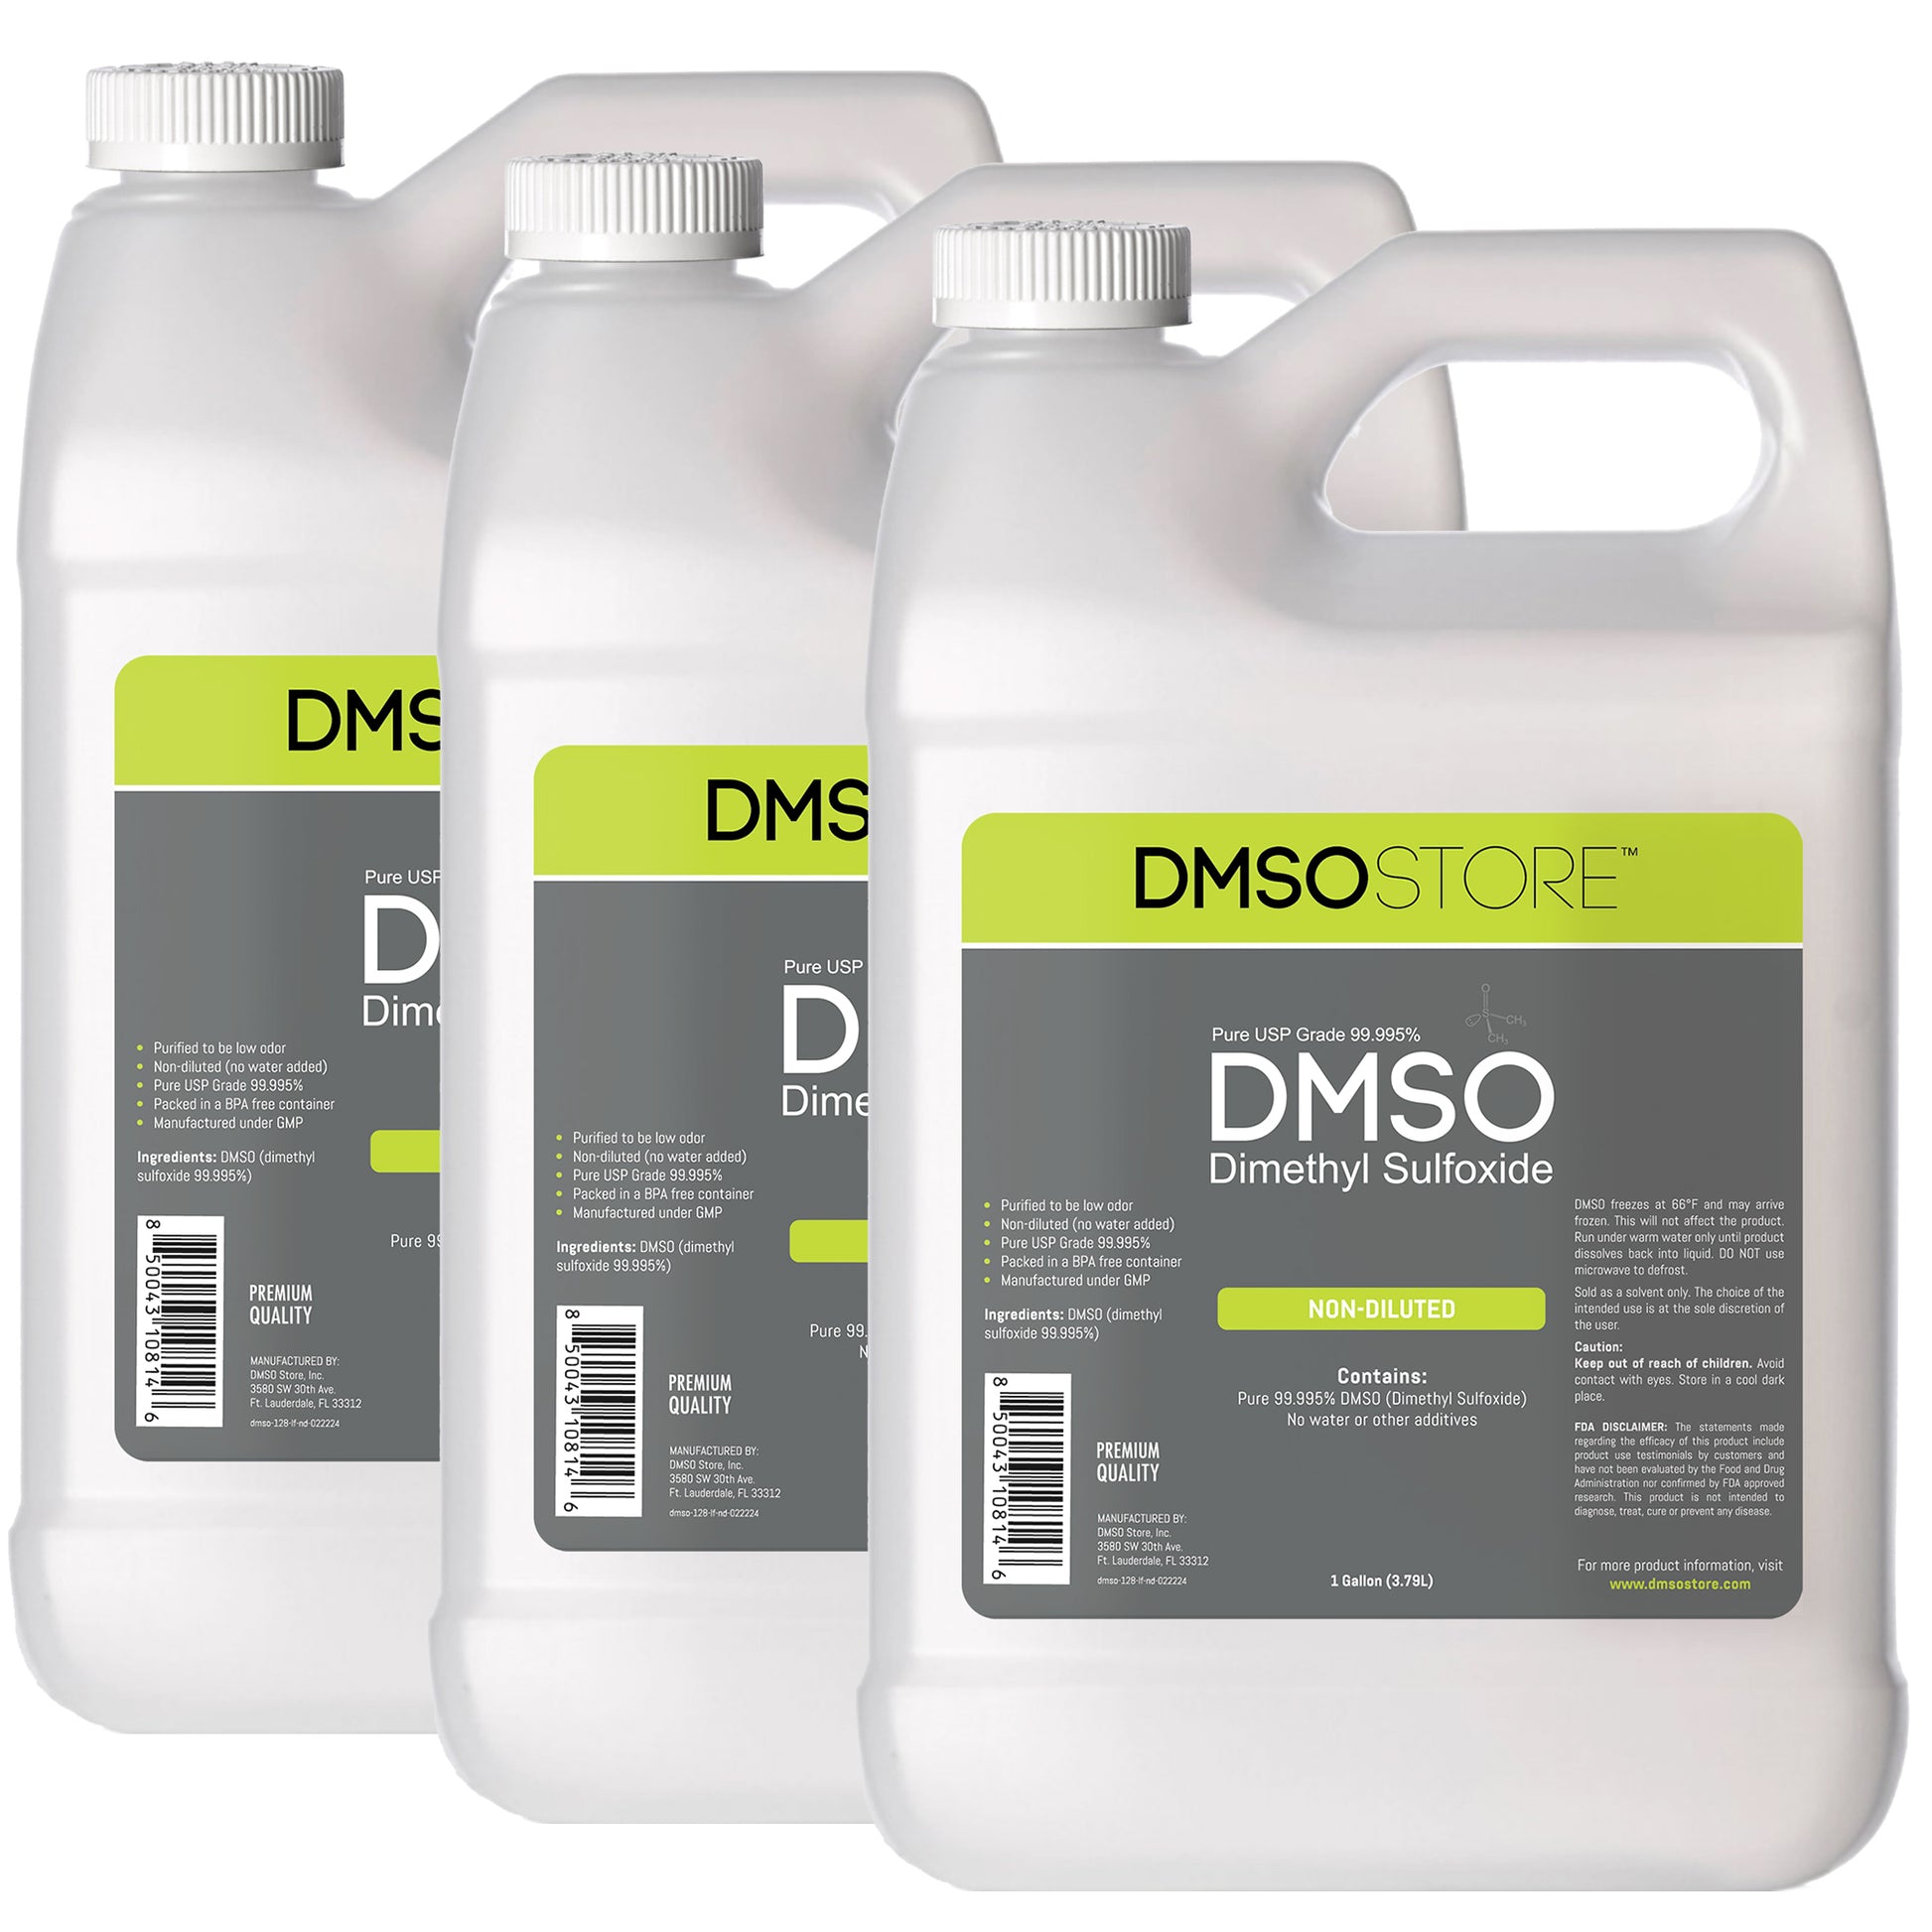 DMSO-liquid-99.995-natural-pain-relief-3-gallon-plastic-non-diluted-dimethyl-sulfoxide. 3 Plastic gallon jugs with white twist on cap. Label reads 99.995% Pure Pharma Grade DMSO (Dimethyl Sulfoxide) 1 gallon. Front view of bottle